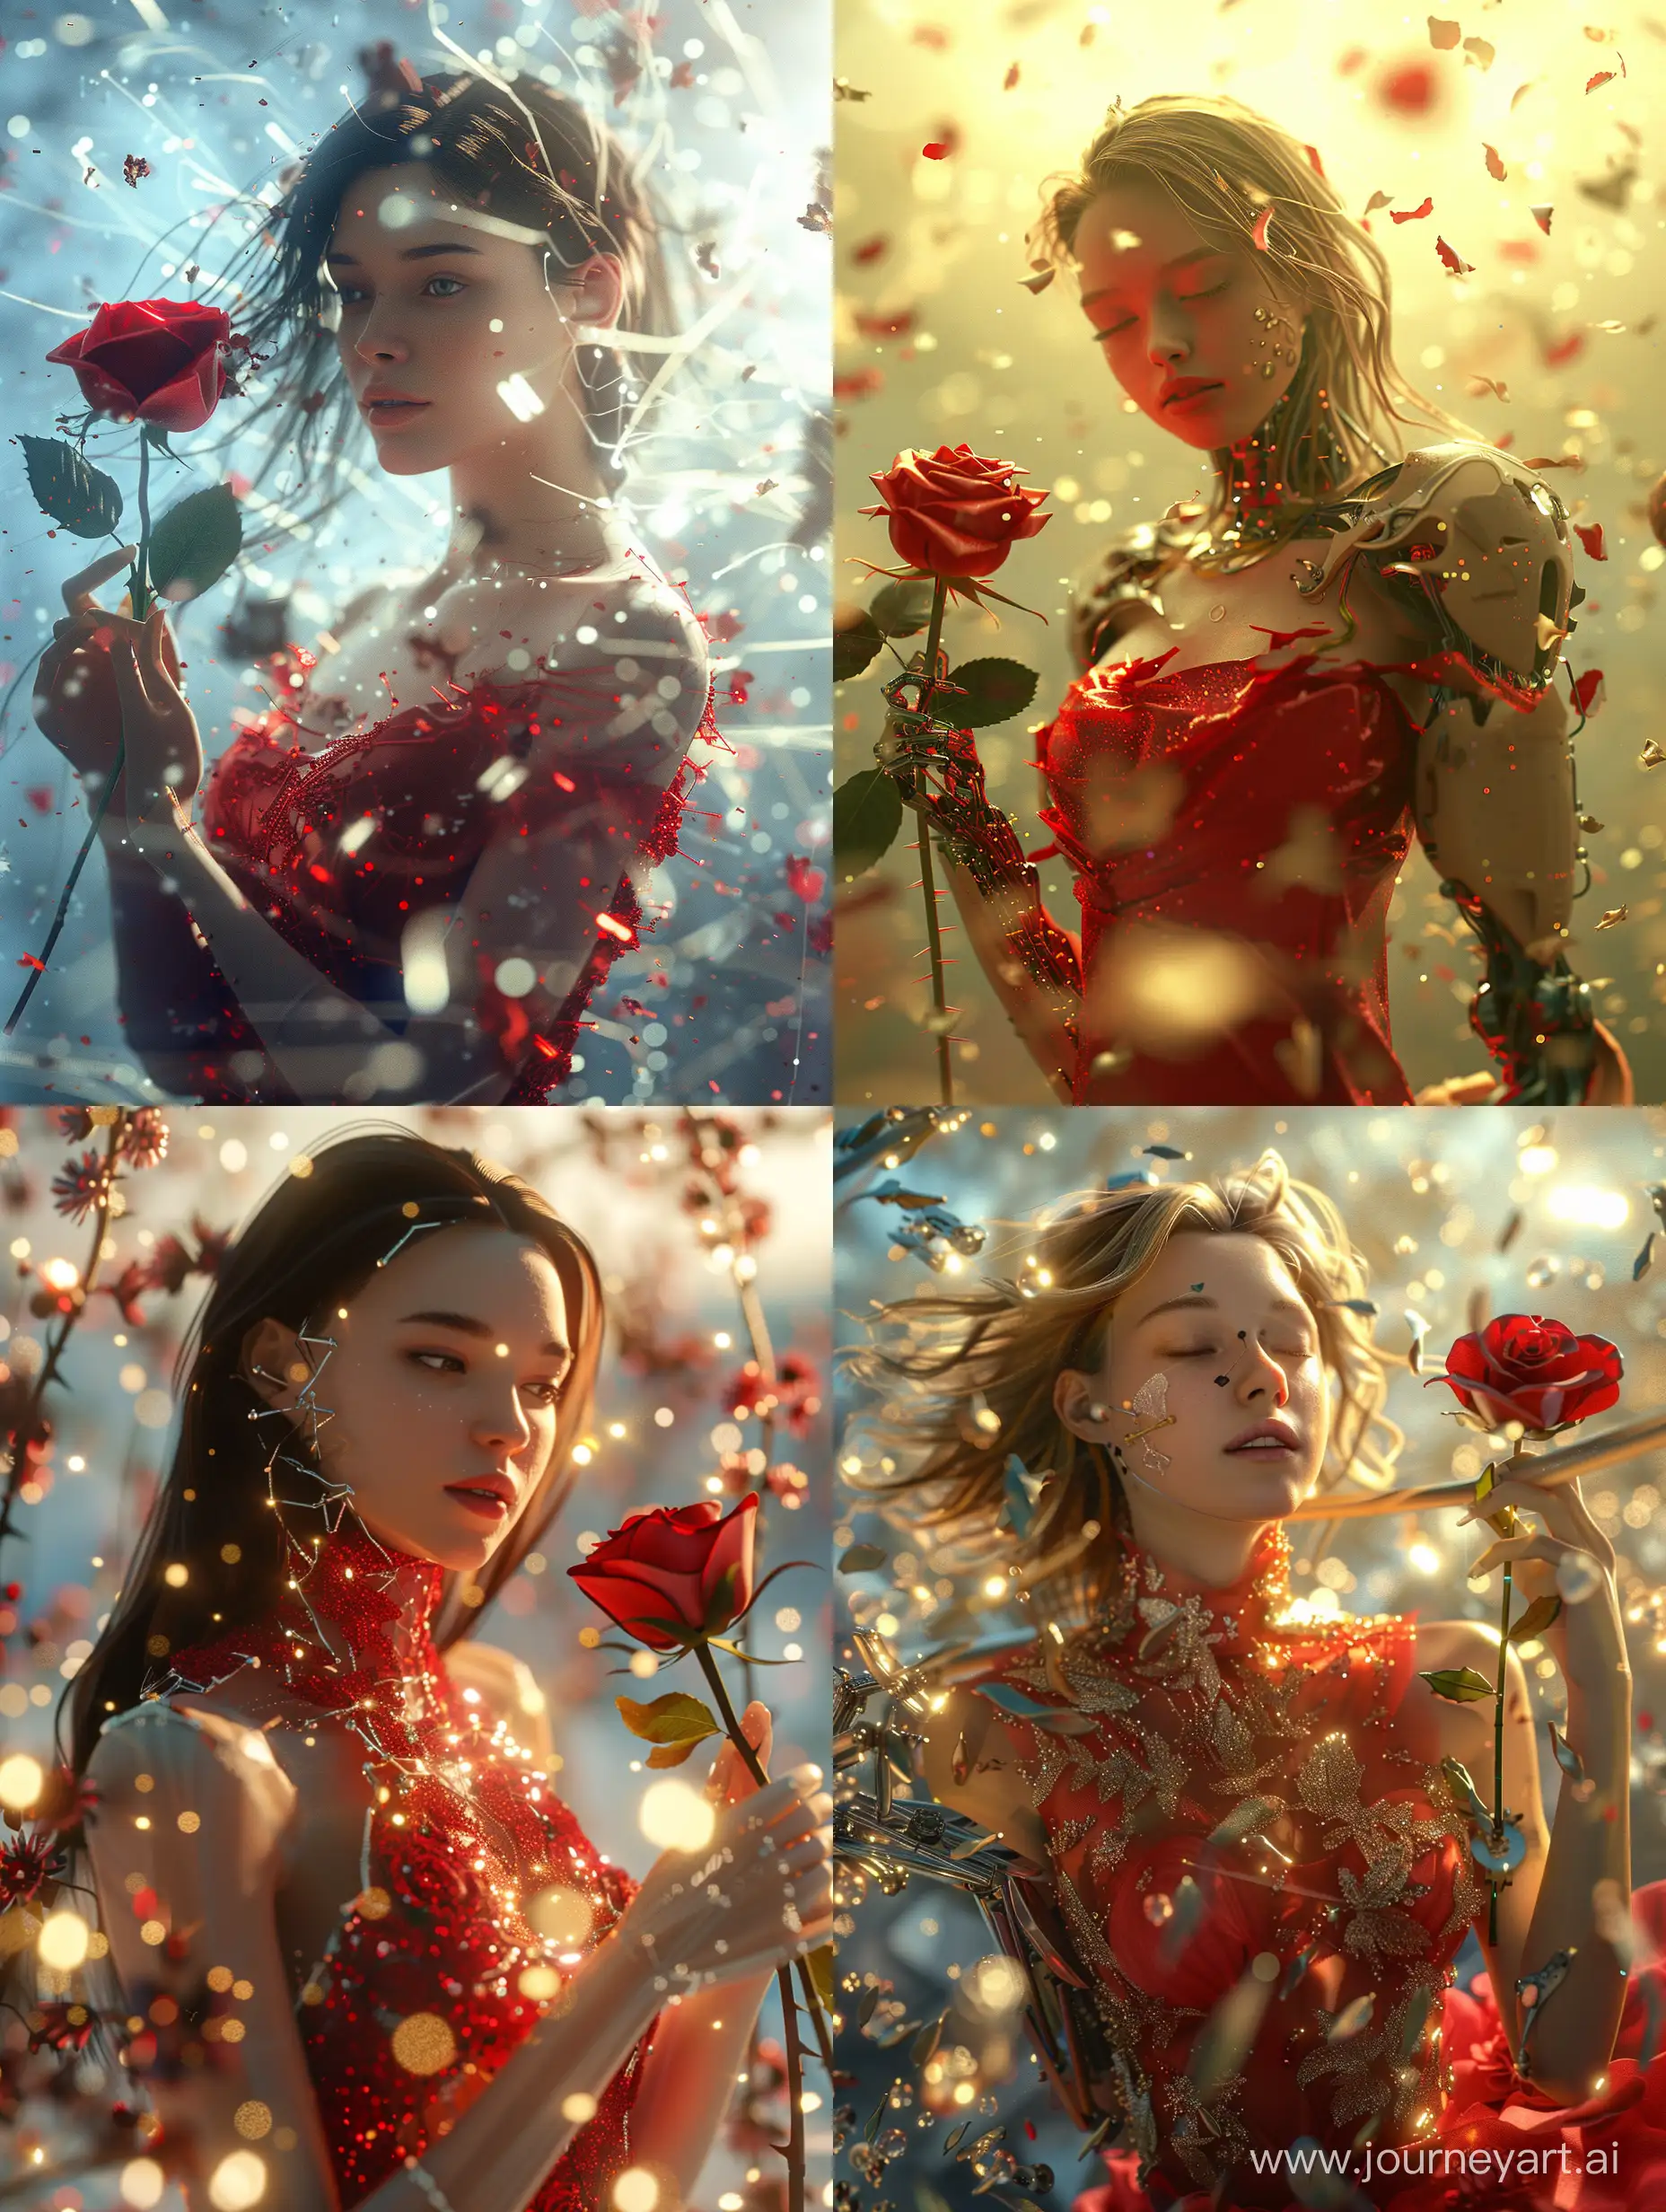 Elegant-Cyborg-Woman-Holding-a-Rose-in-Cinematic-3D-Morning-Light